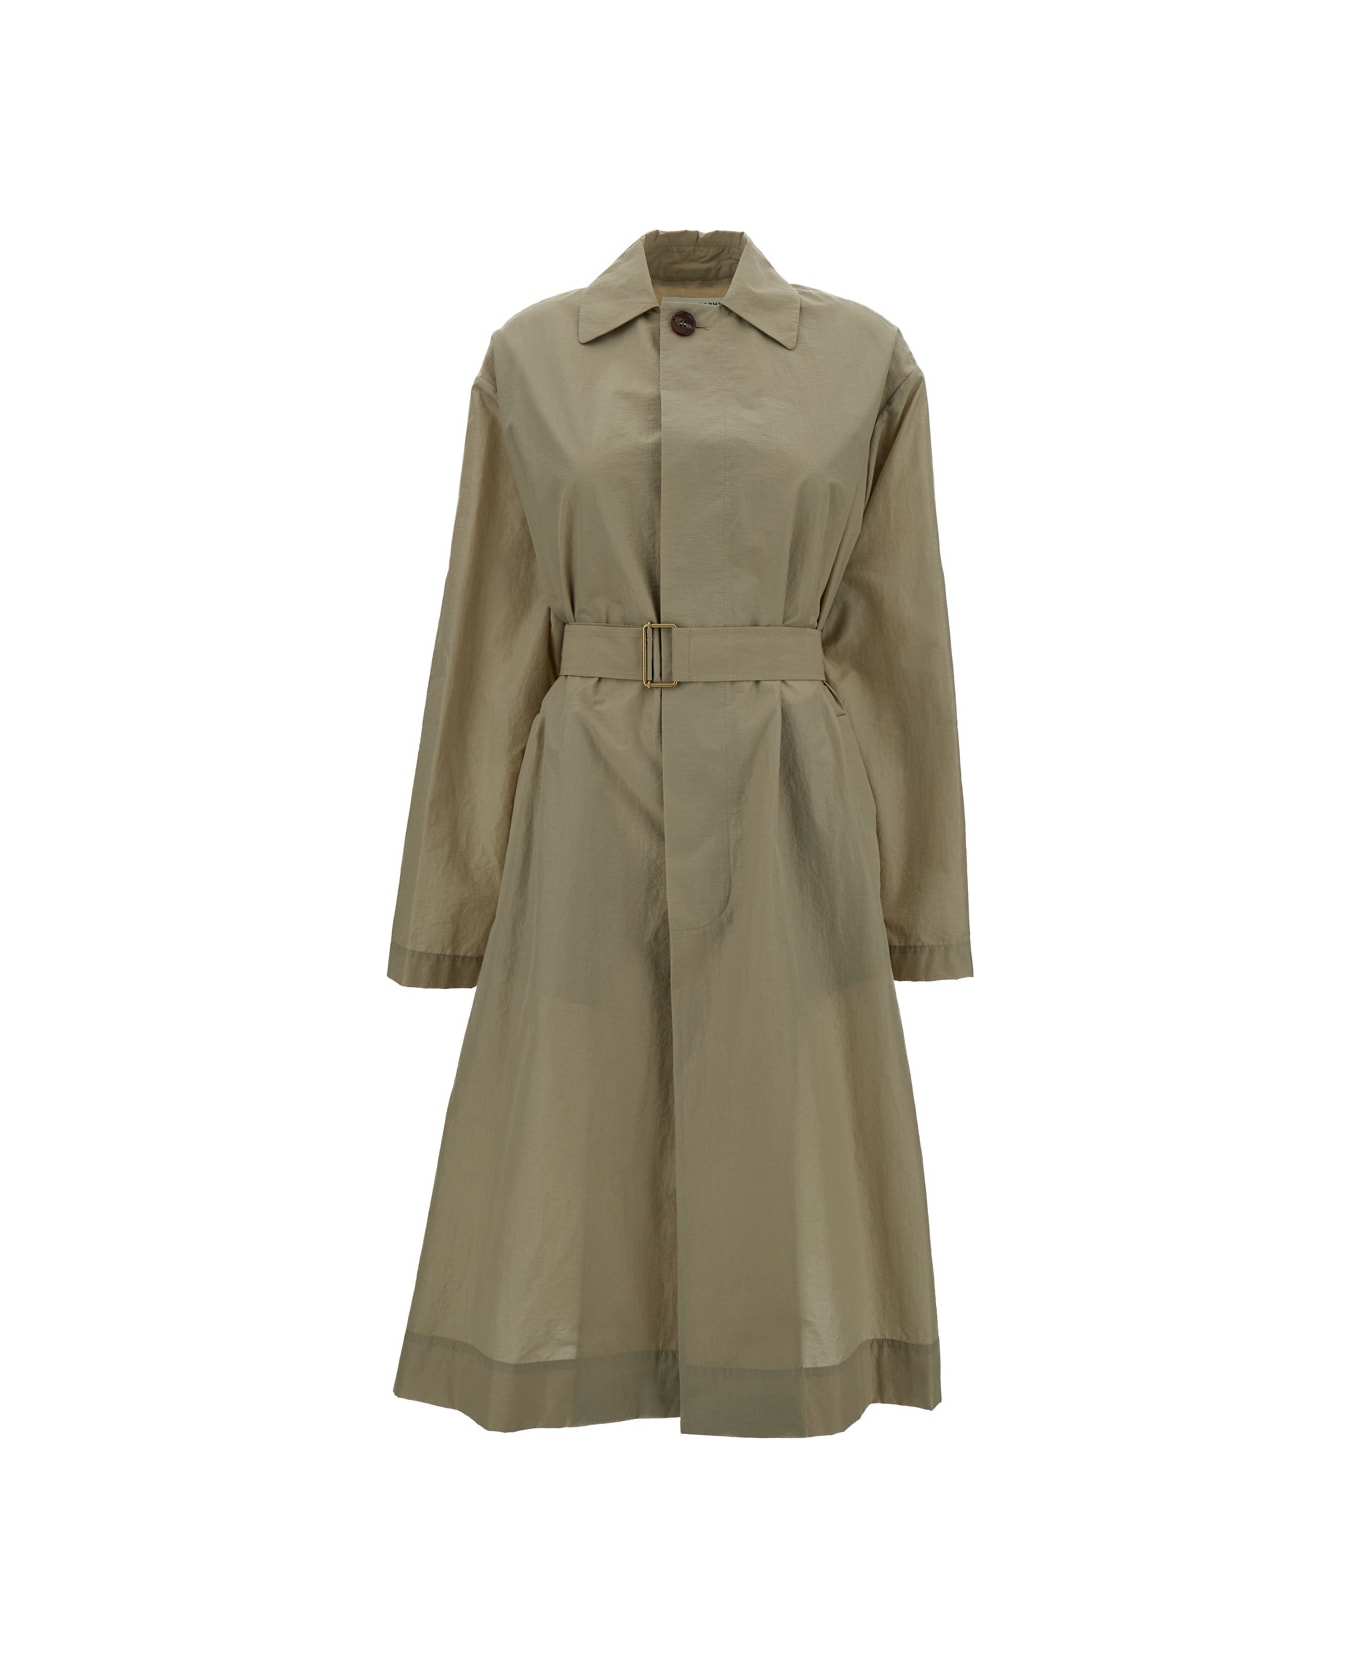 Philosophy di Lorenzo Serafini Olive Green Trench Coat With Buttons In Technical Fabric Woman - Green